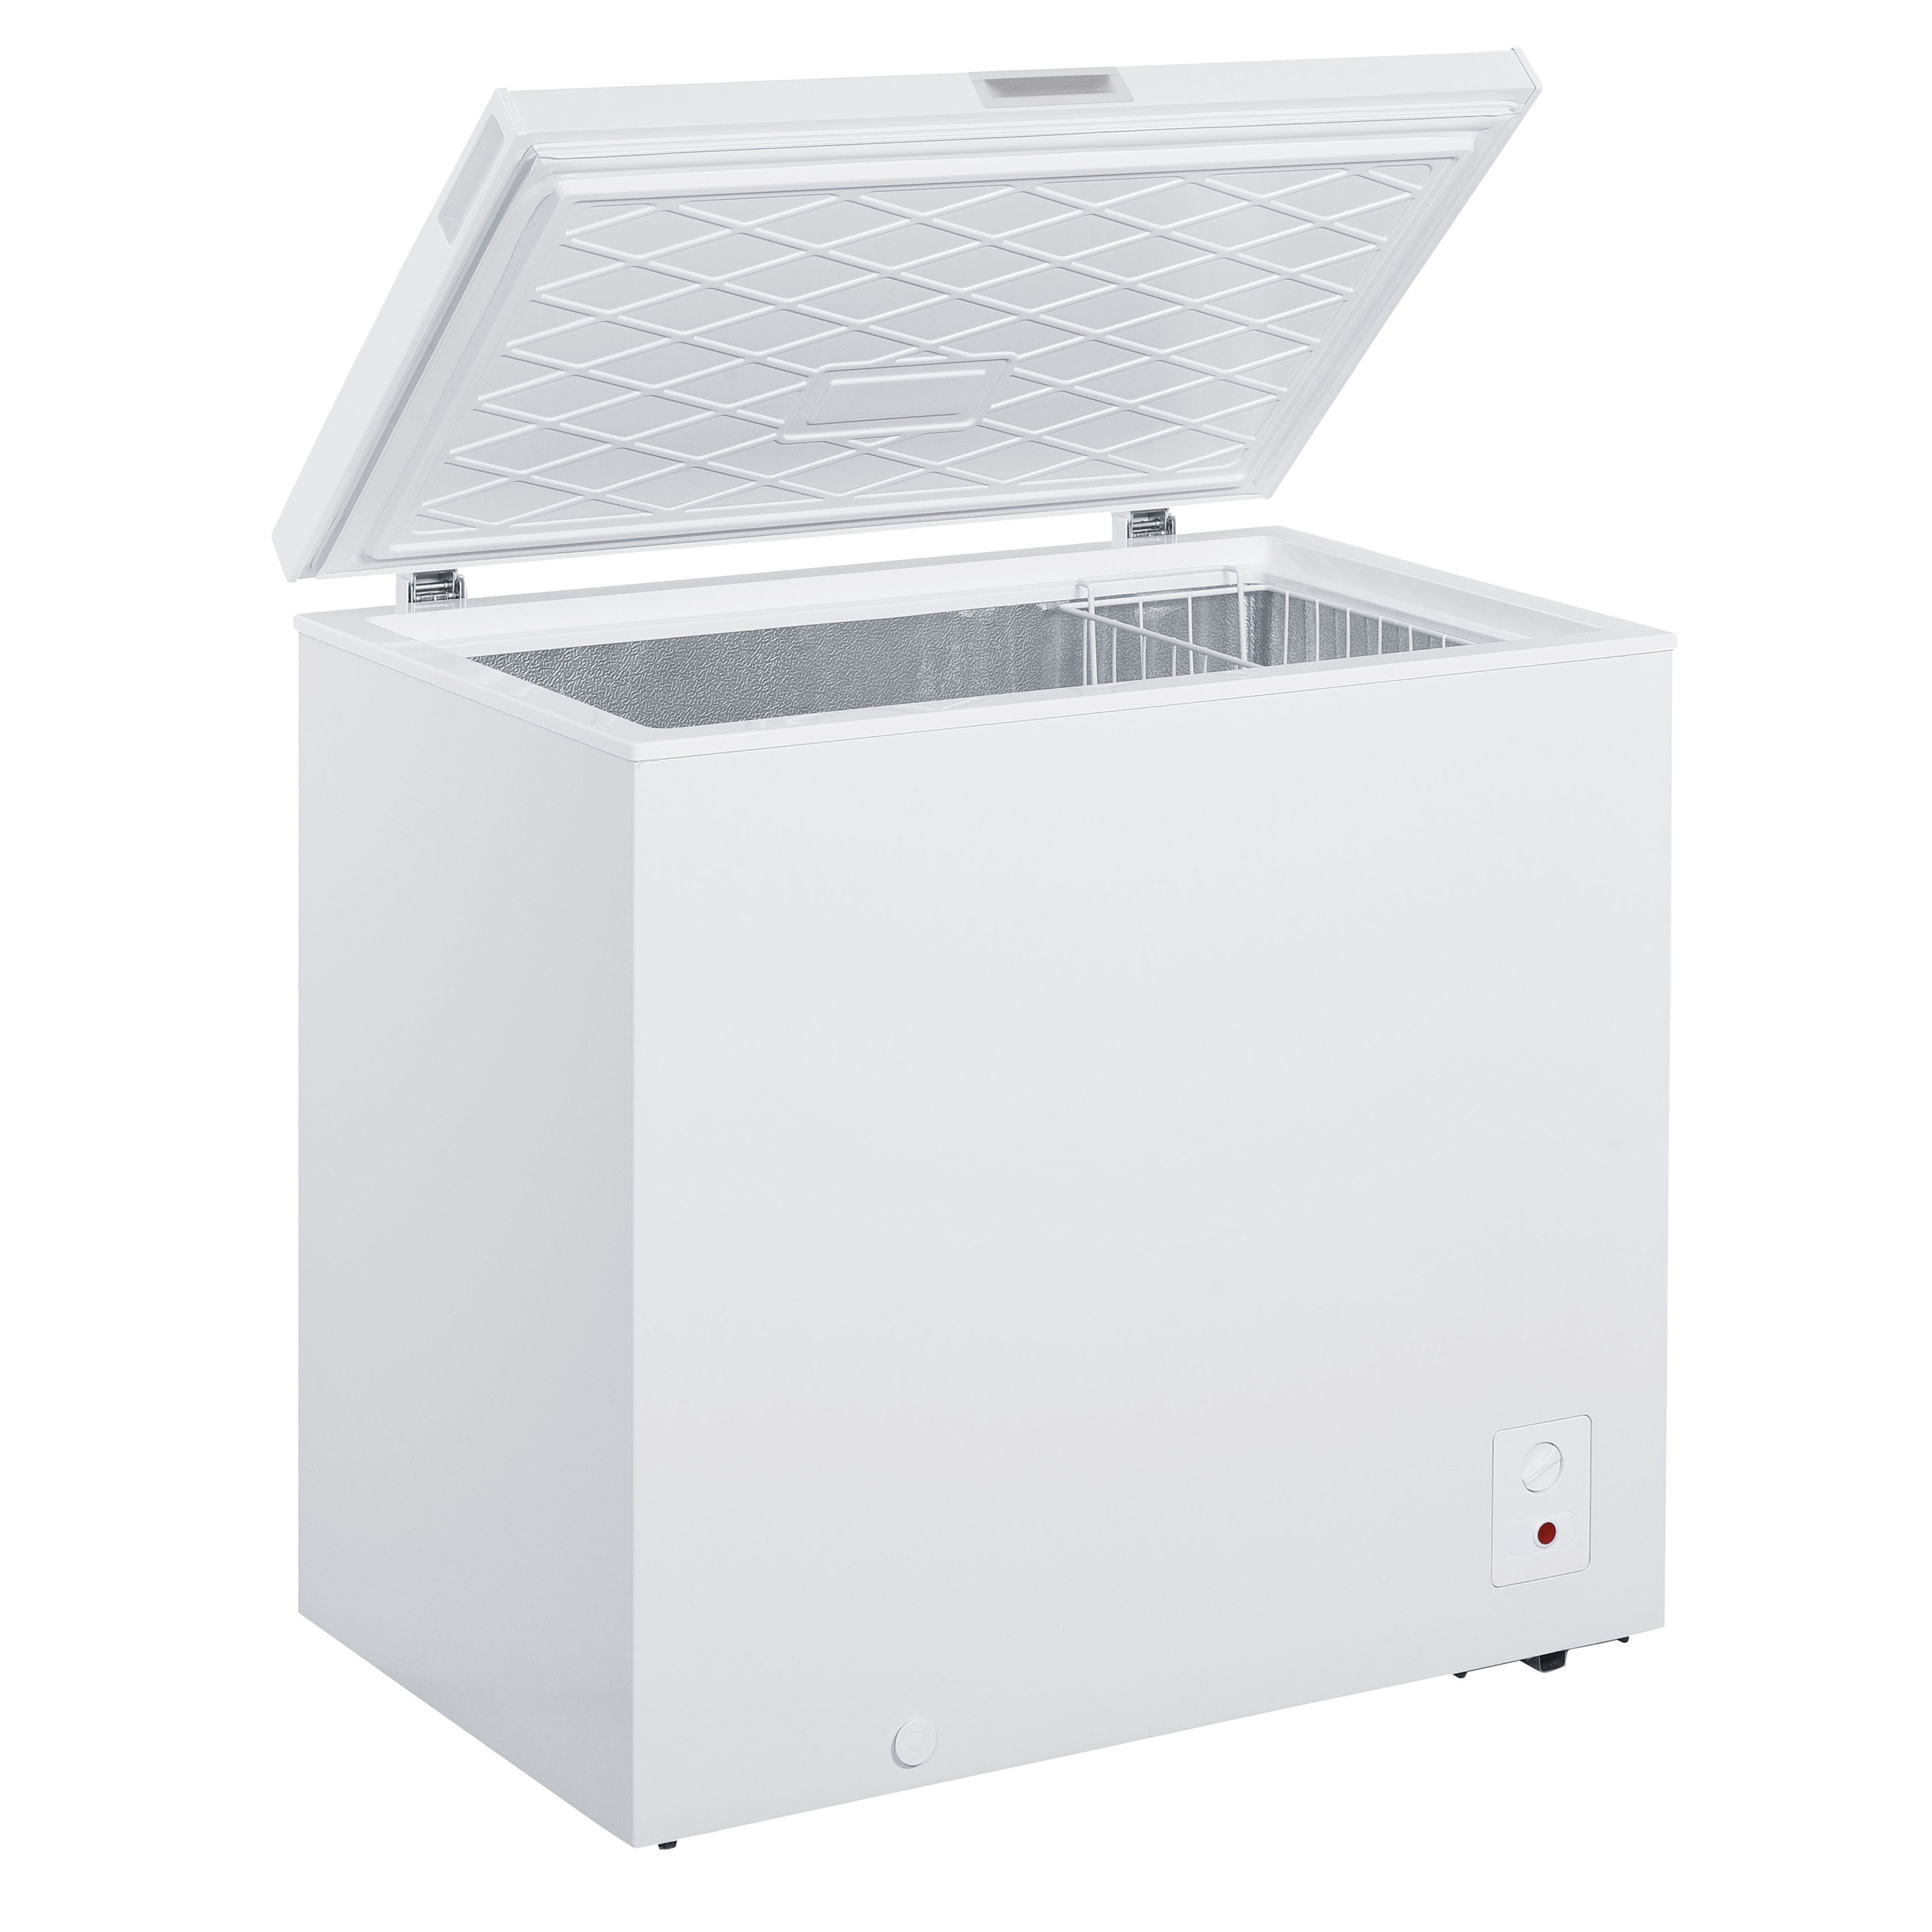 Magic Cool 7.0 Cu. ft. Chest Freezer, in White (MCCF7WI) - image 3 of 5